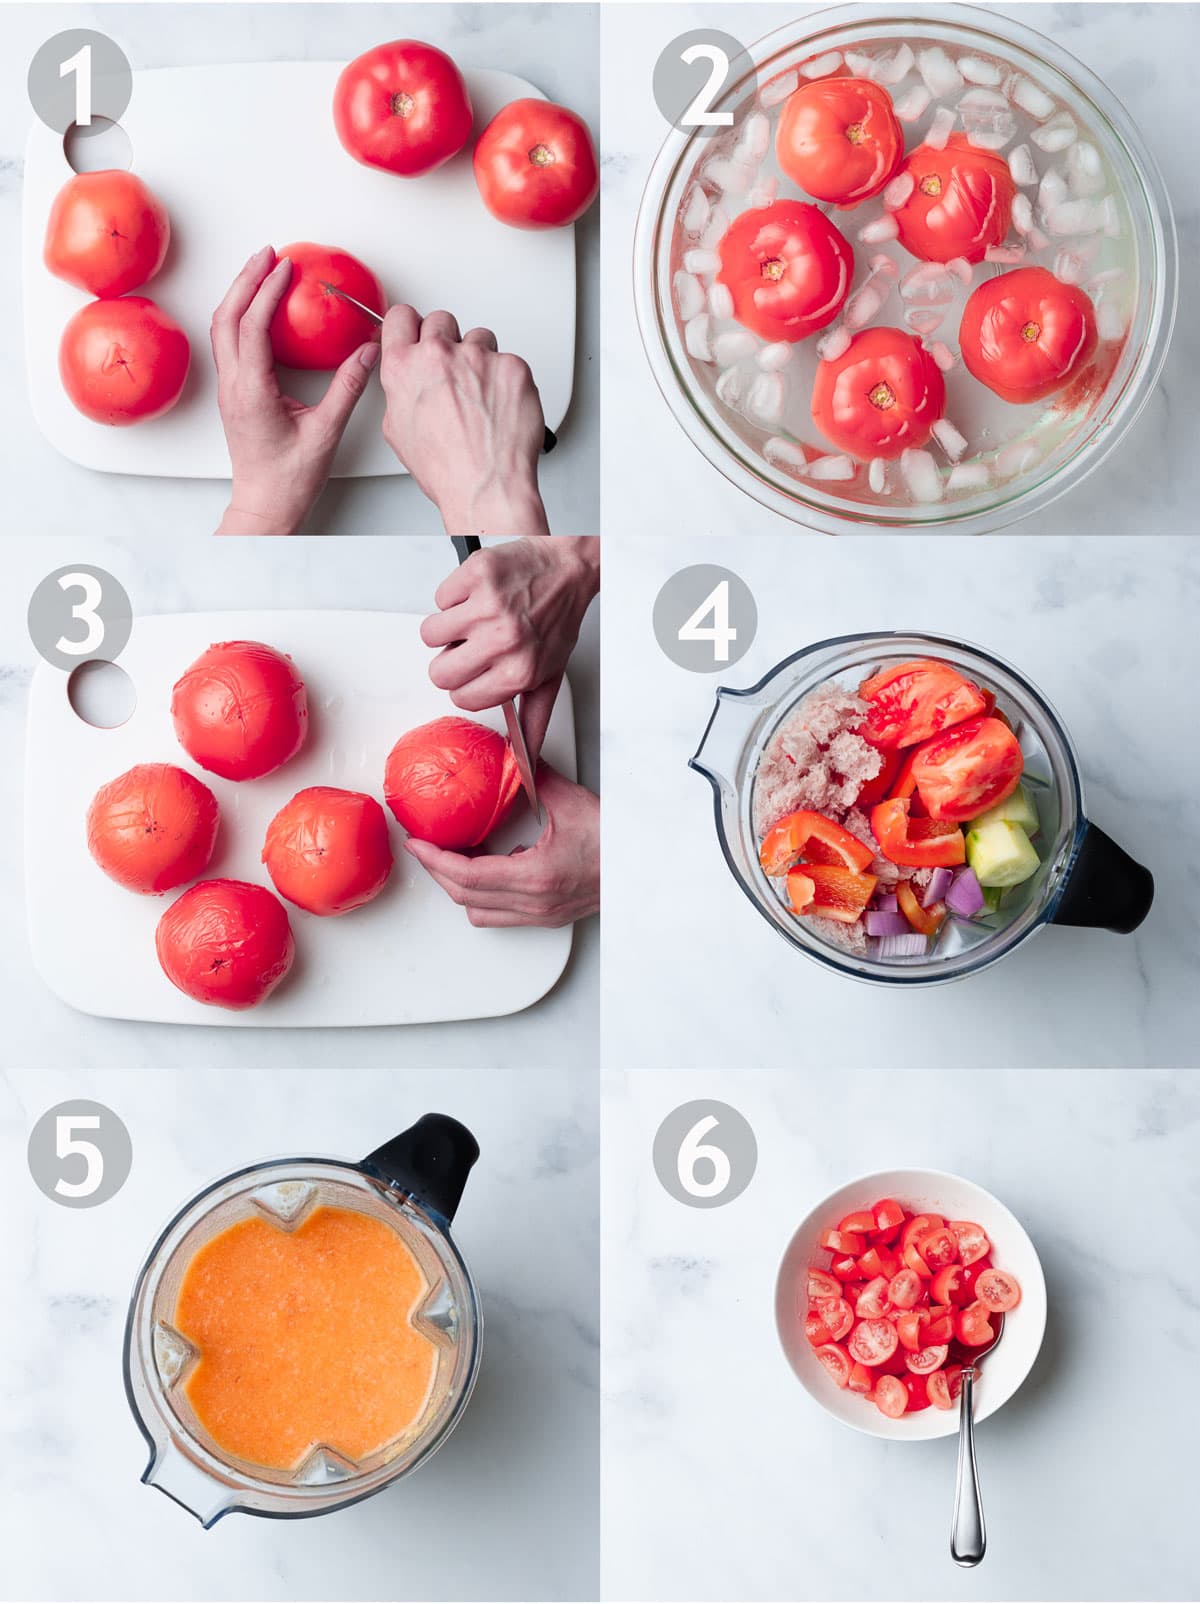 Steps to making a gazpacho including scoring, blanching, shocking and peeling tomatoes, and pureeing all ingredients in a blender.